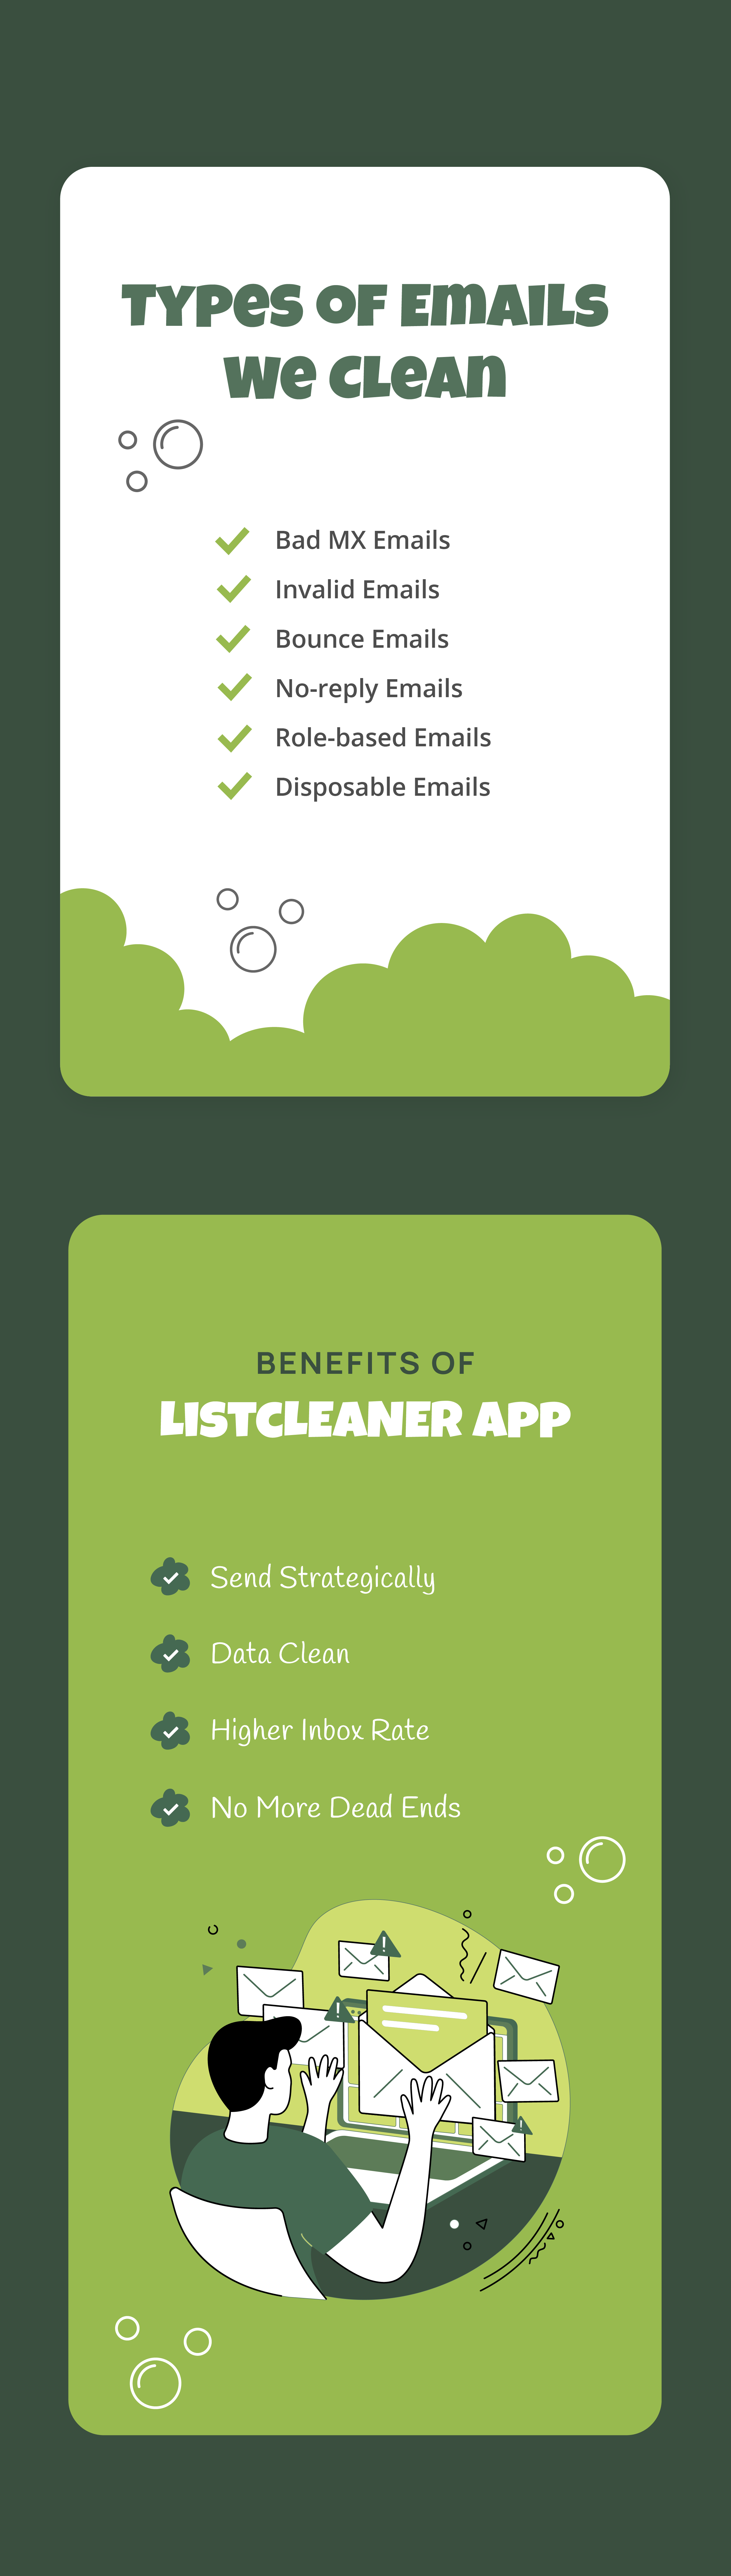 WP List Cleaner - WordPress Email List Cleaning Plugin - 3